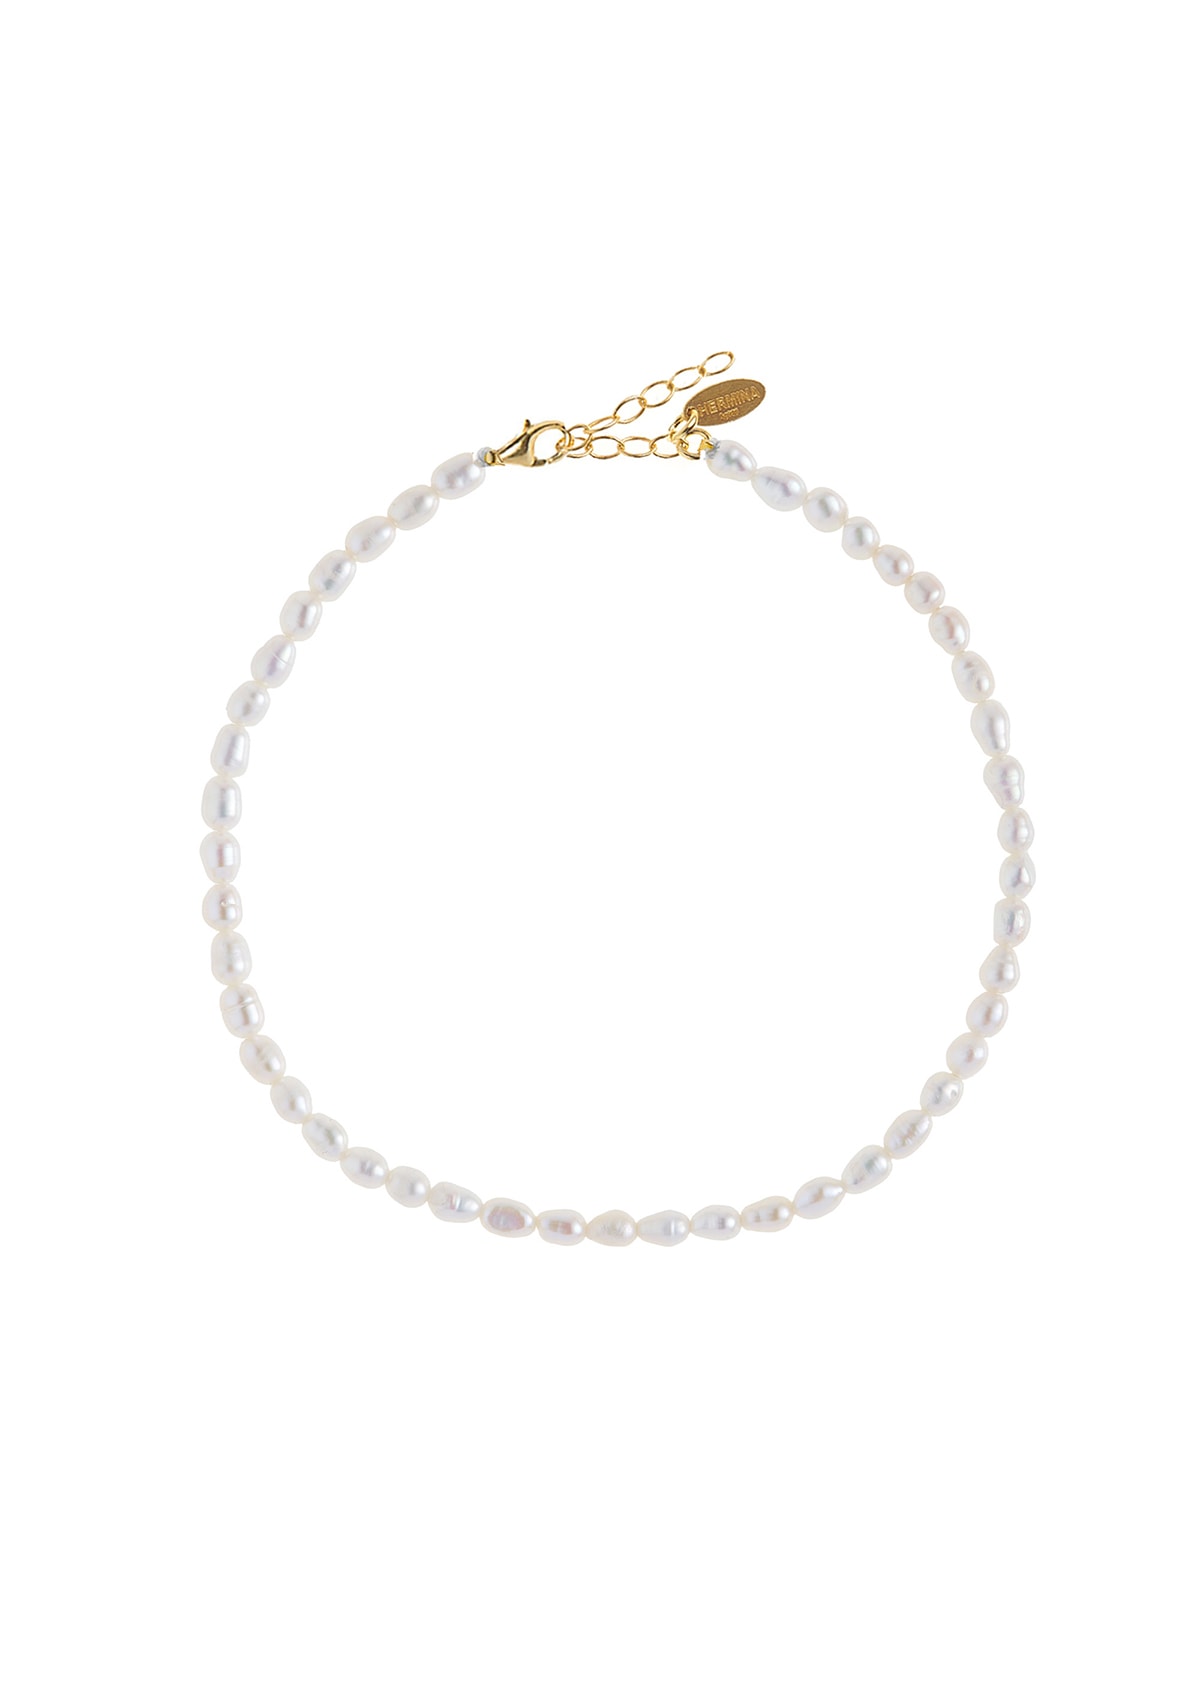 Oval Pearl Anklet